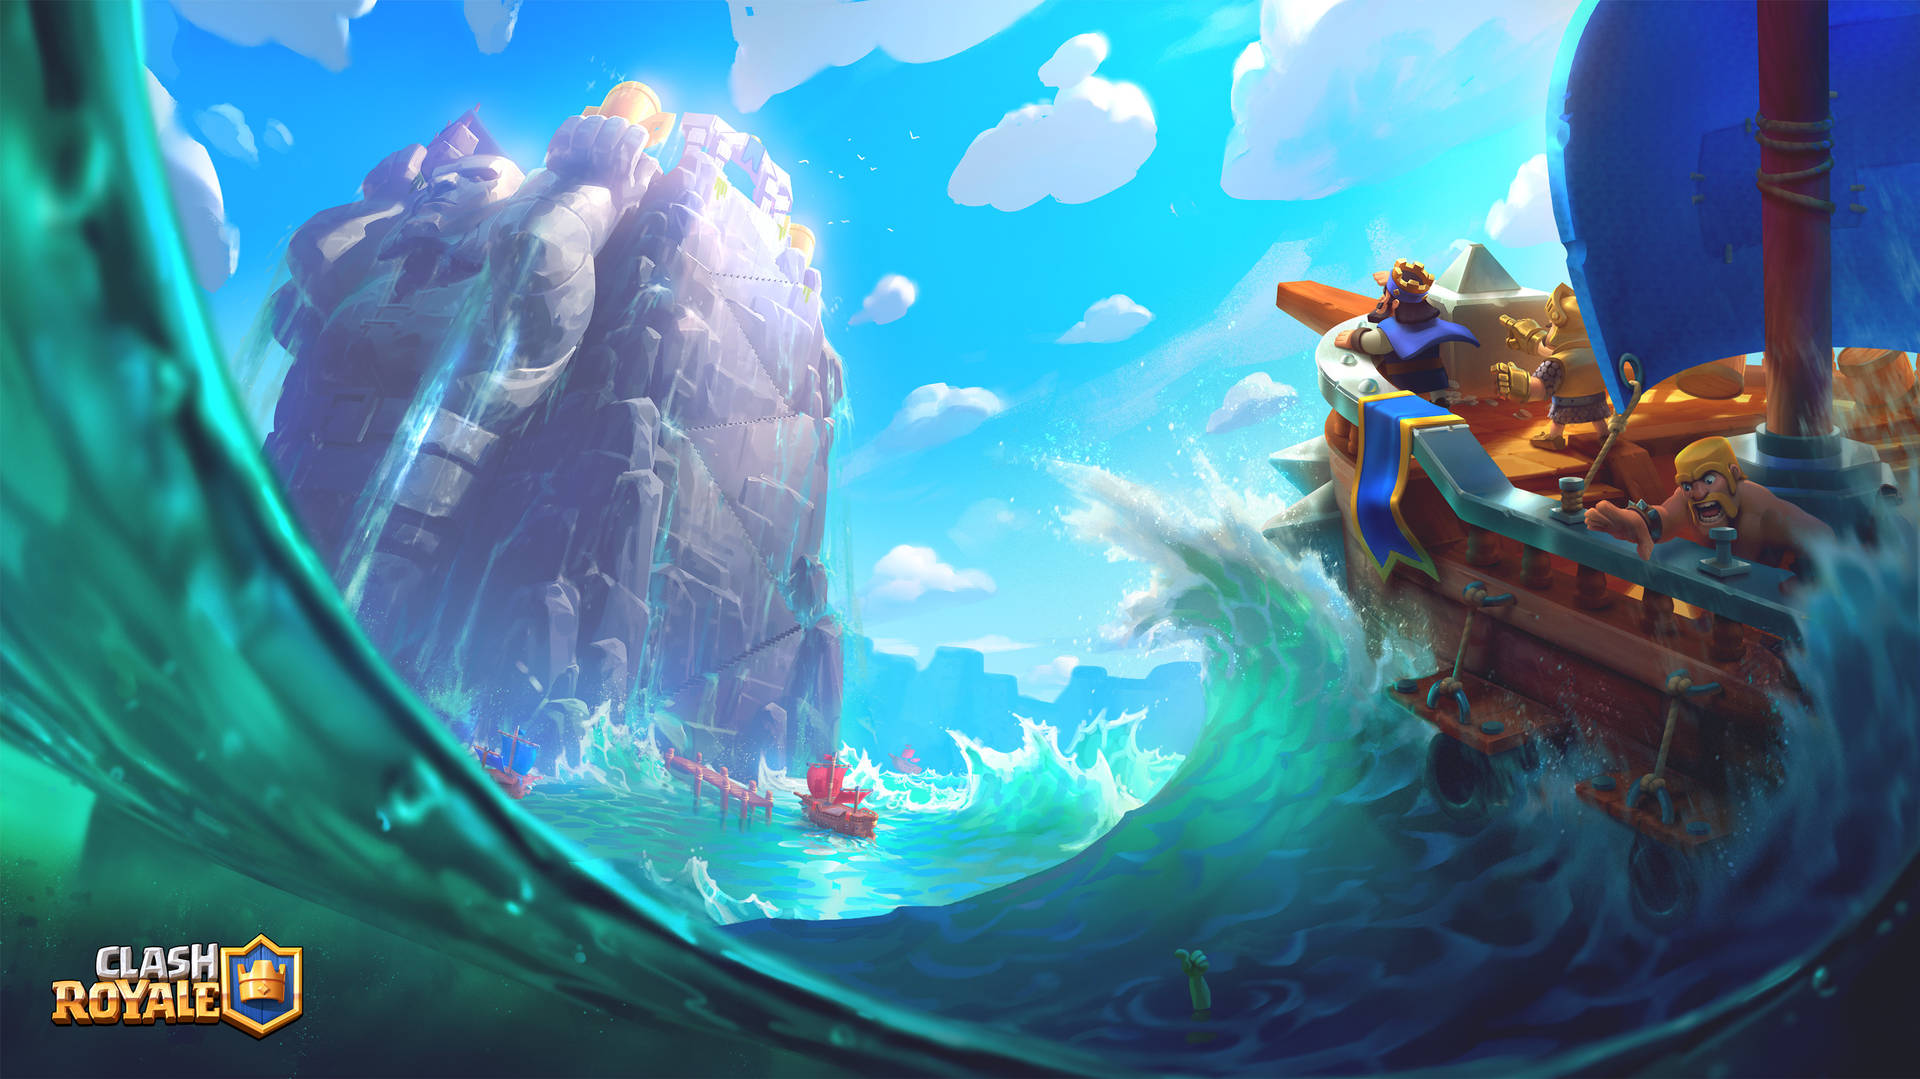 Ocean Wallpaper From The Clash Royale Phone Game